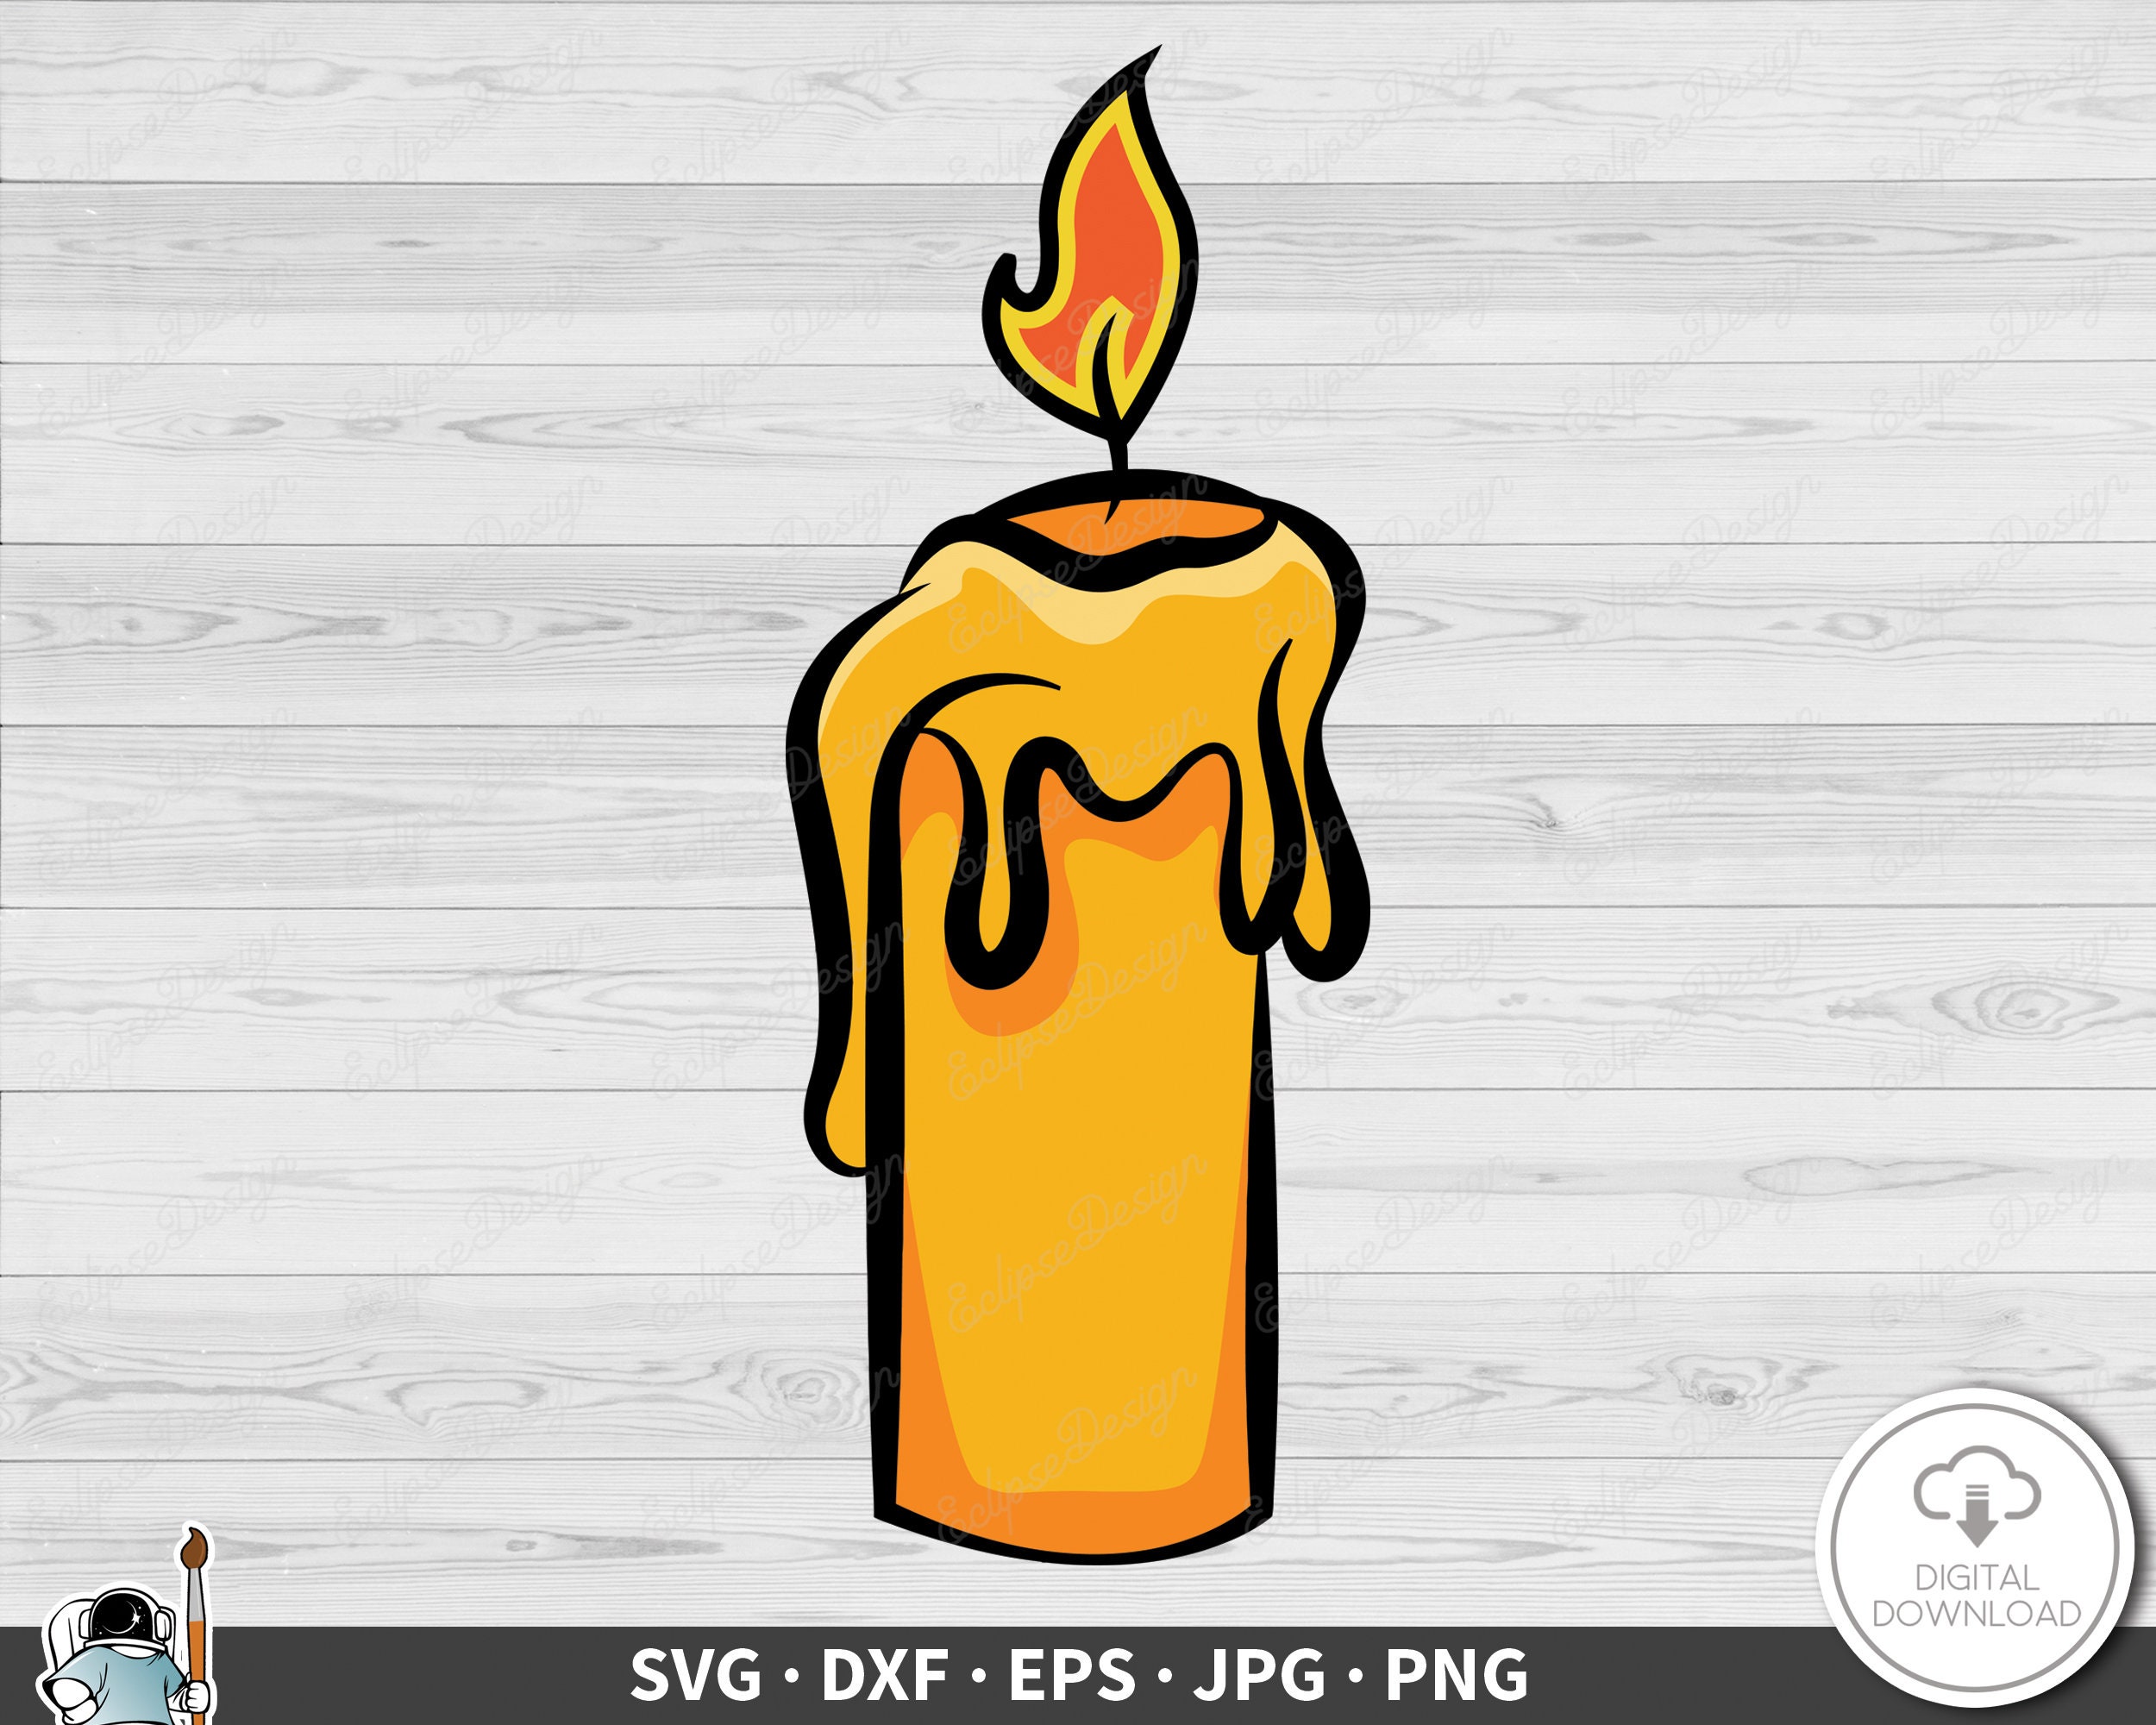 22,633 Melting Candle Images, Stock Photos, 3D objects, & Vectors